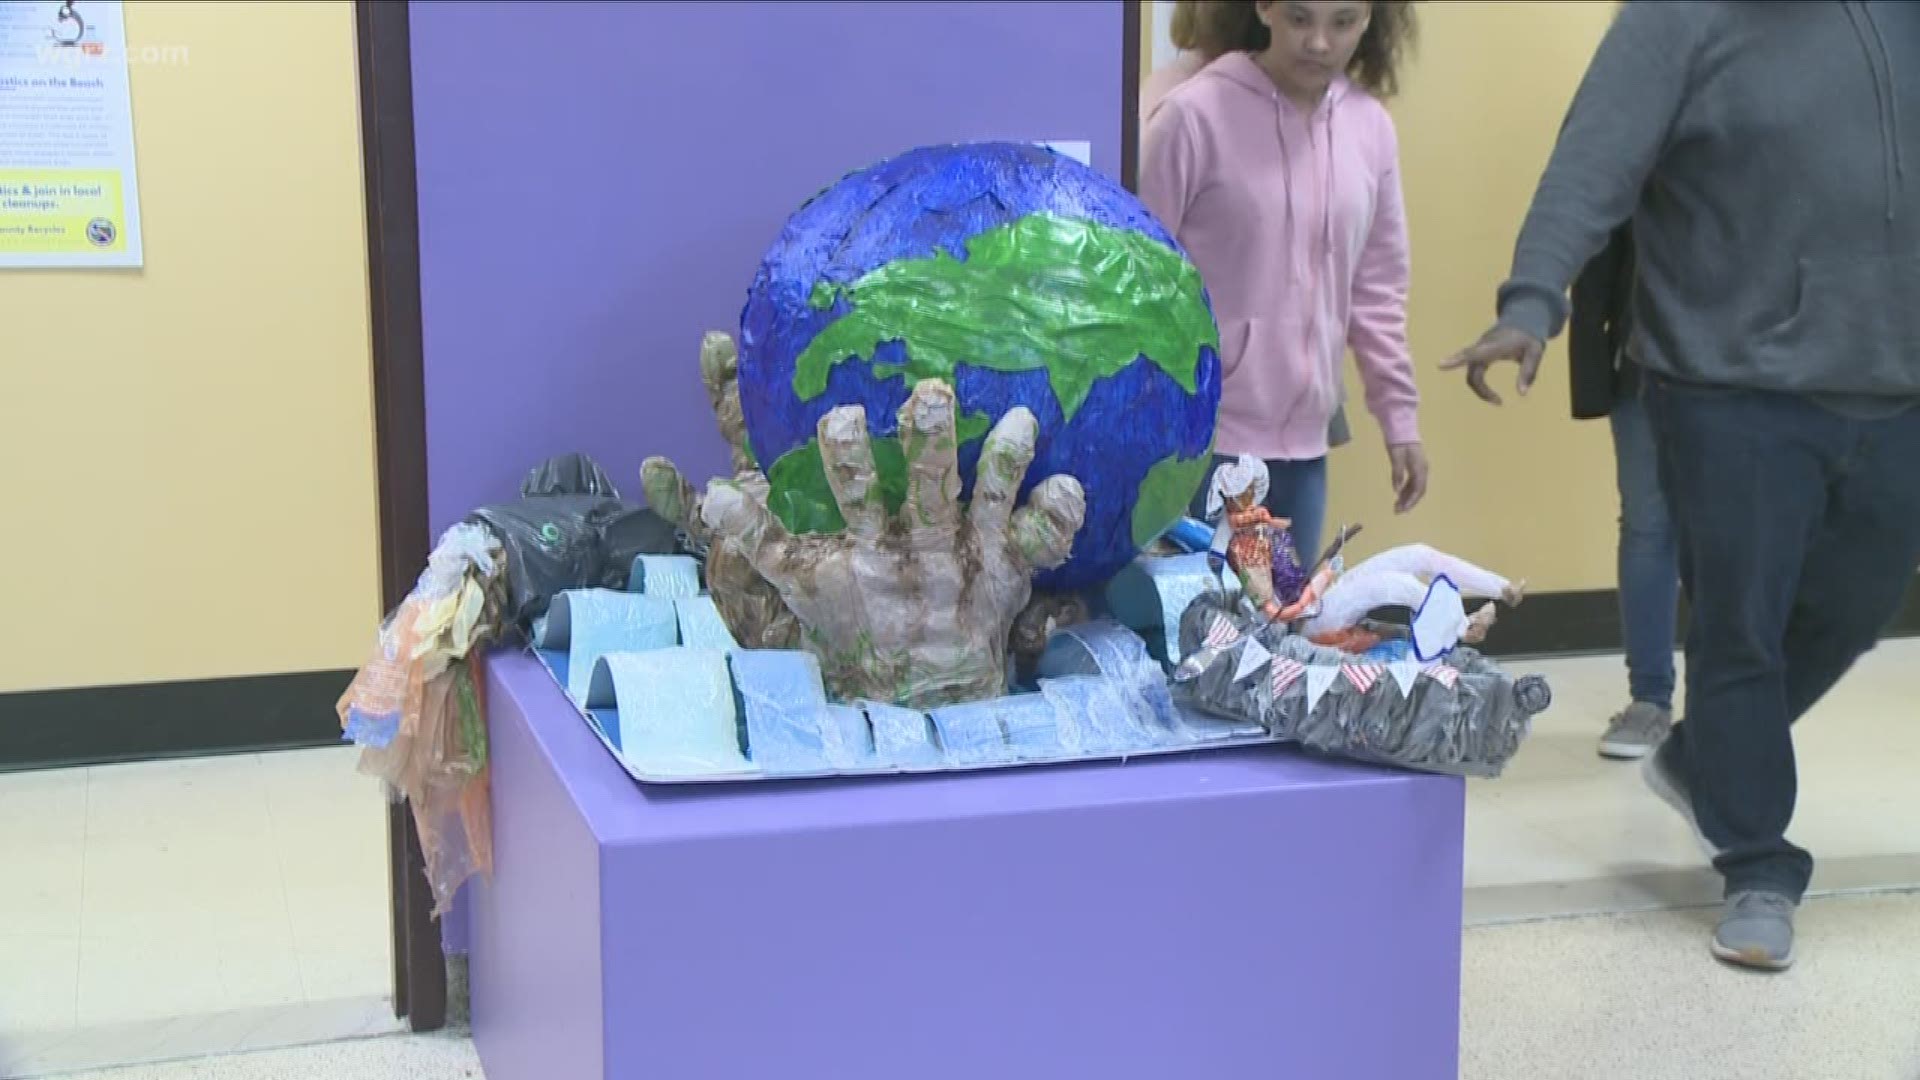 “Pollution Prevention through Art,” which opened Sunday, includes colorful rain barrels created by local students.